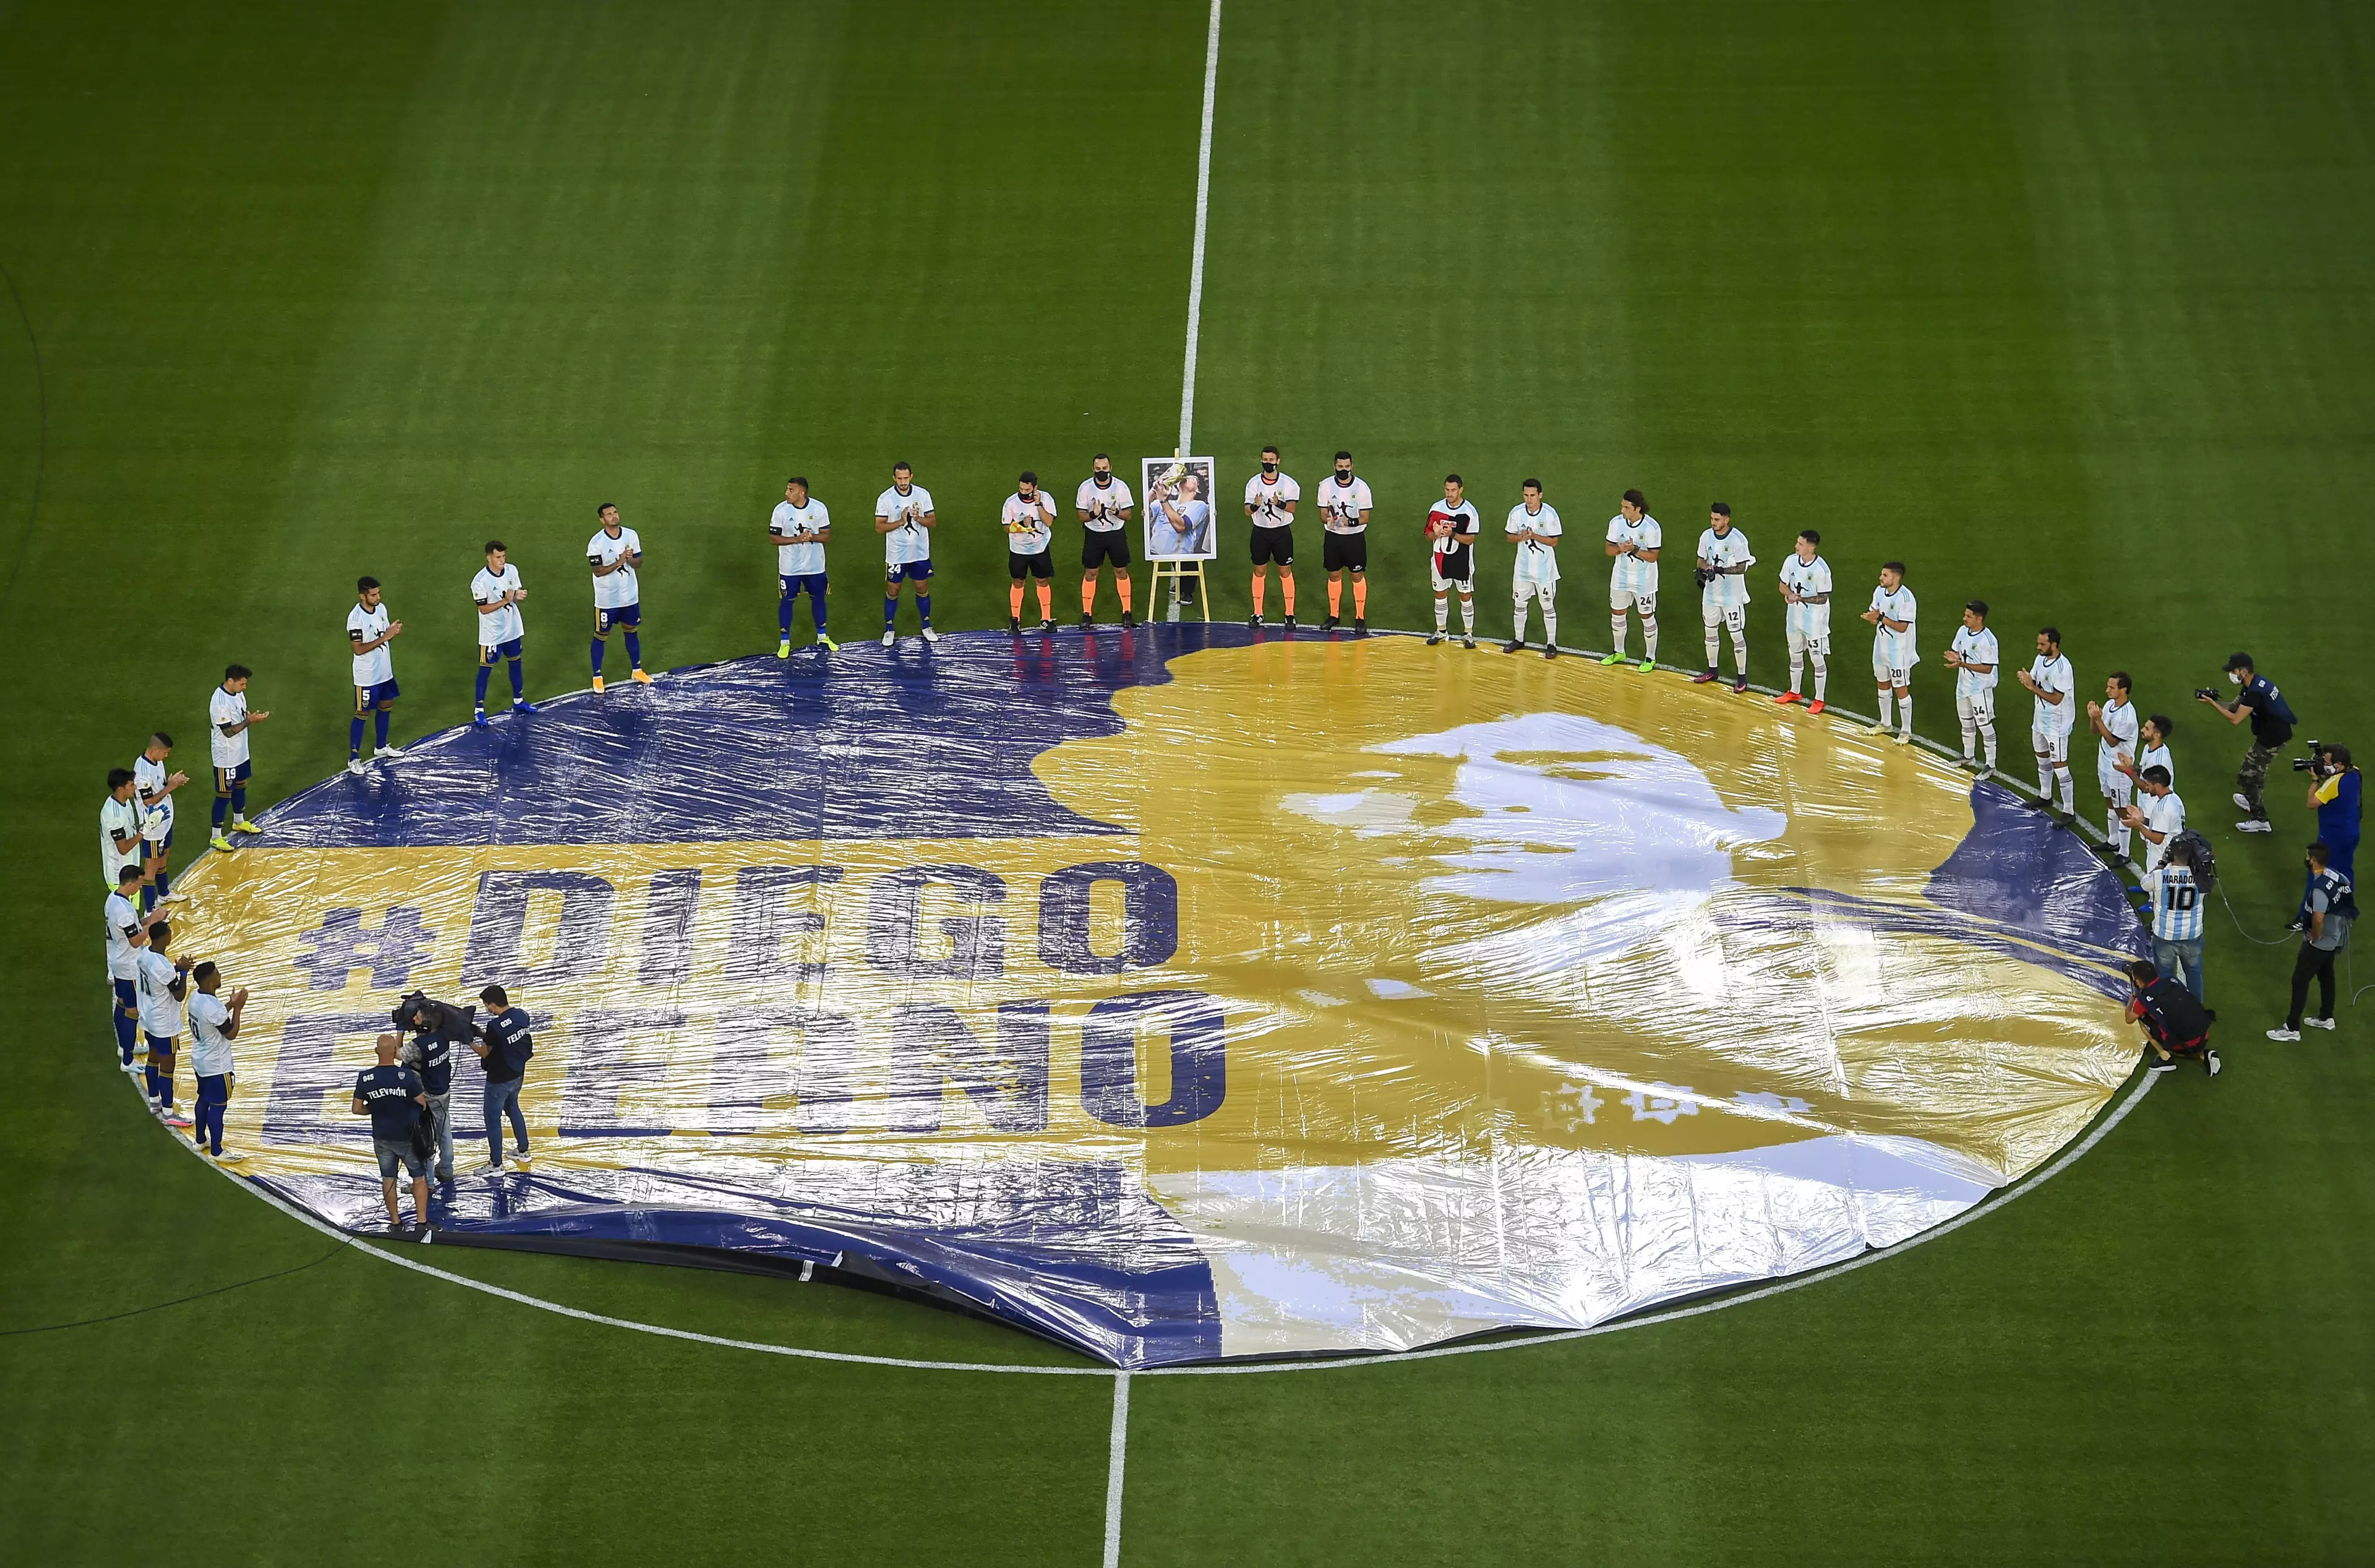 The players pay tribute to Maradona ahead of kick off. Image: PA Images